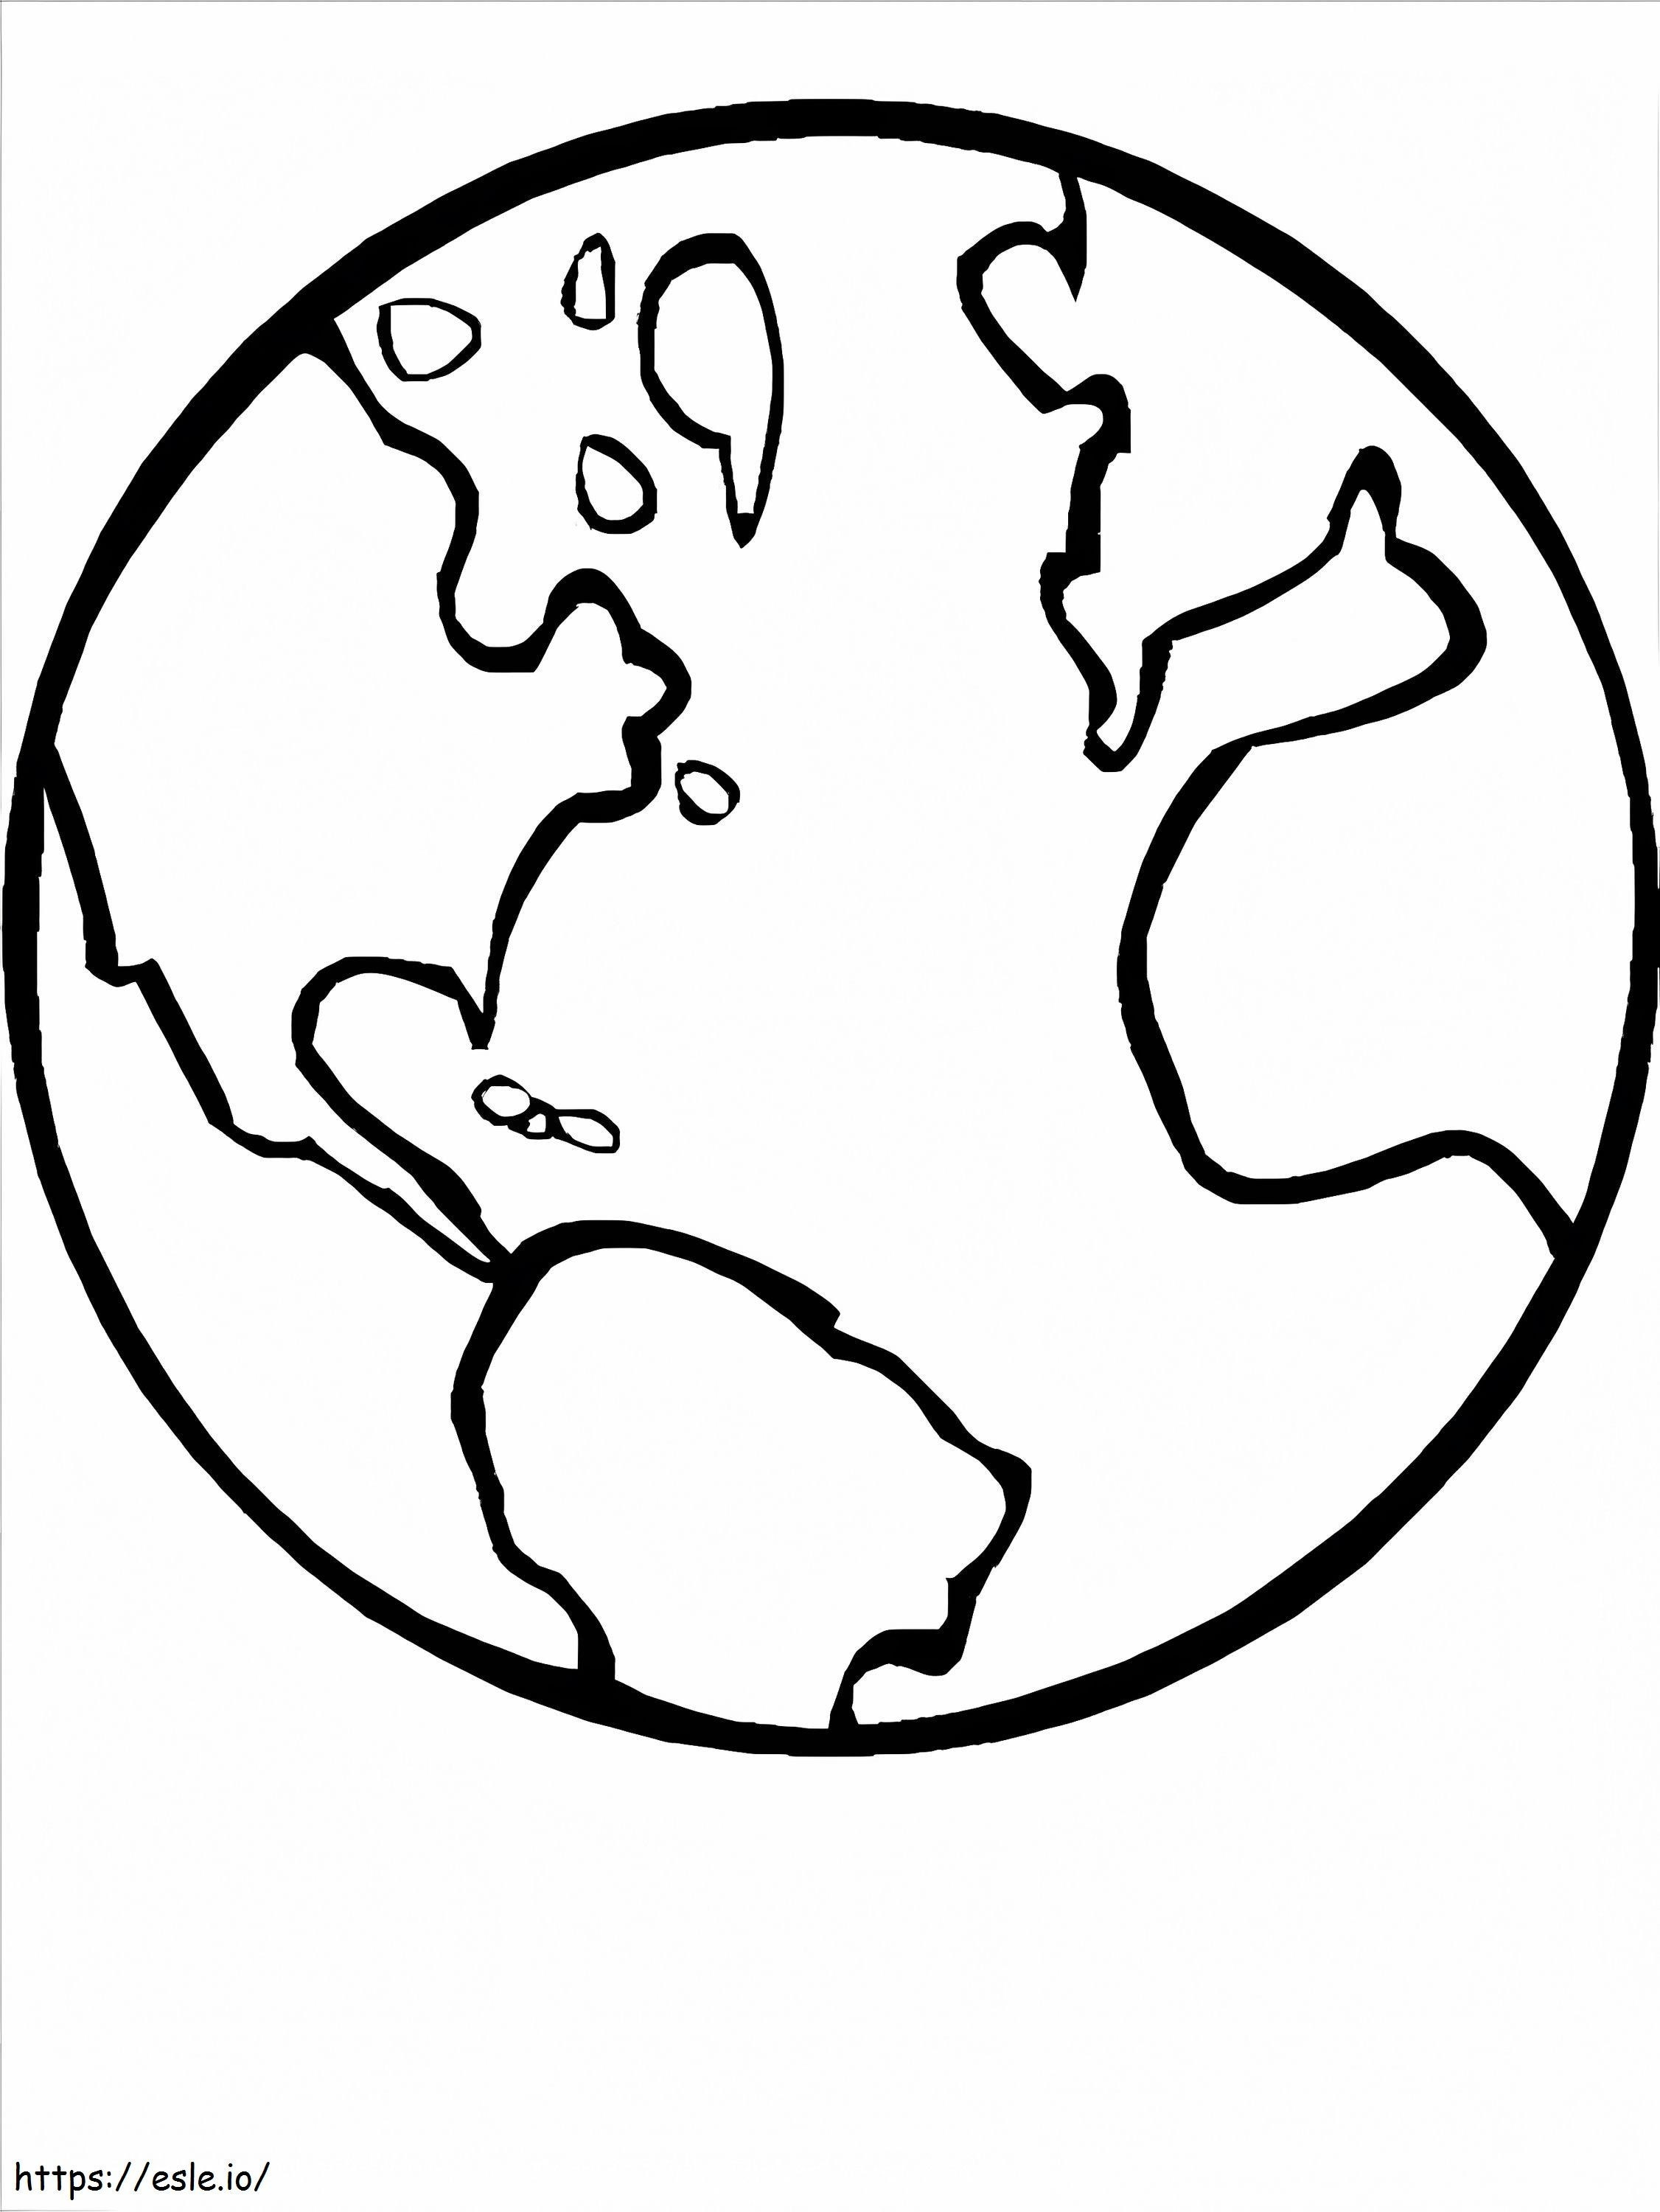 Earth Outer Space coloring page